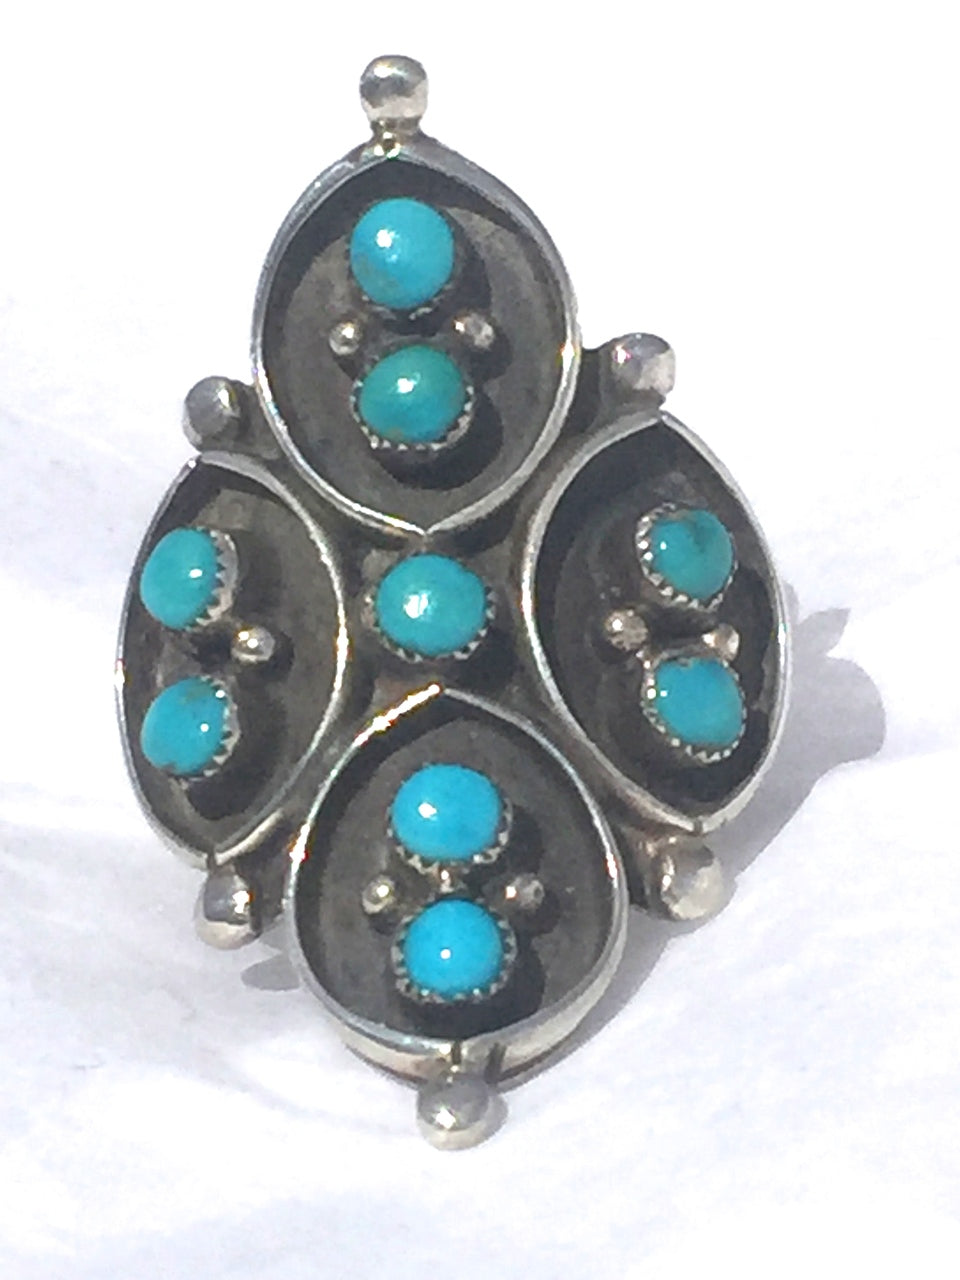 Vintage Sterling Silver Southwest Tribal Turquoise Ring Petite Pointe  Size 8.75 6.9g